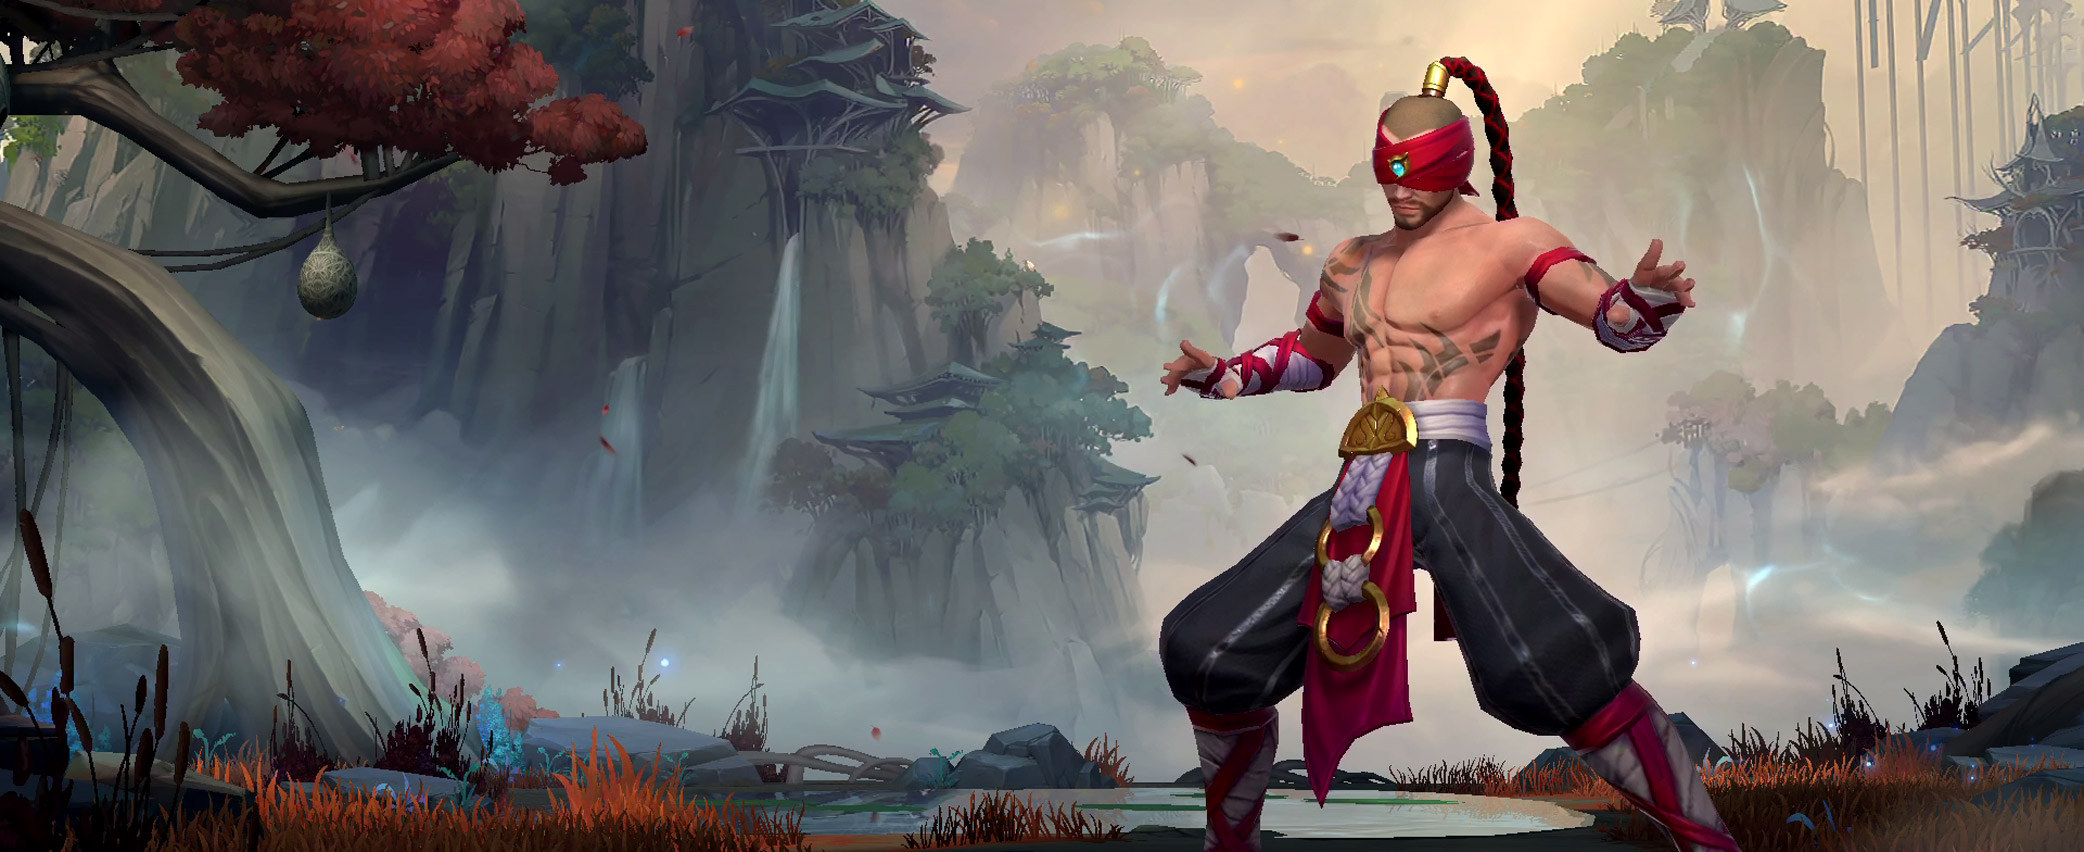 LoL players slam Riot Games for “insulting” Prestige Lee Sin skin